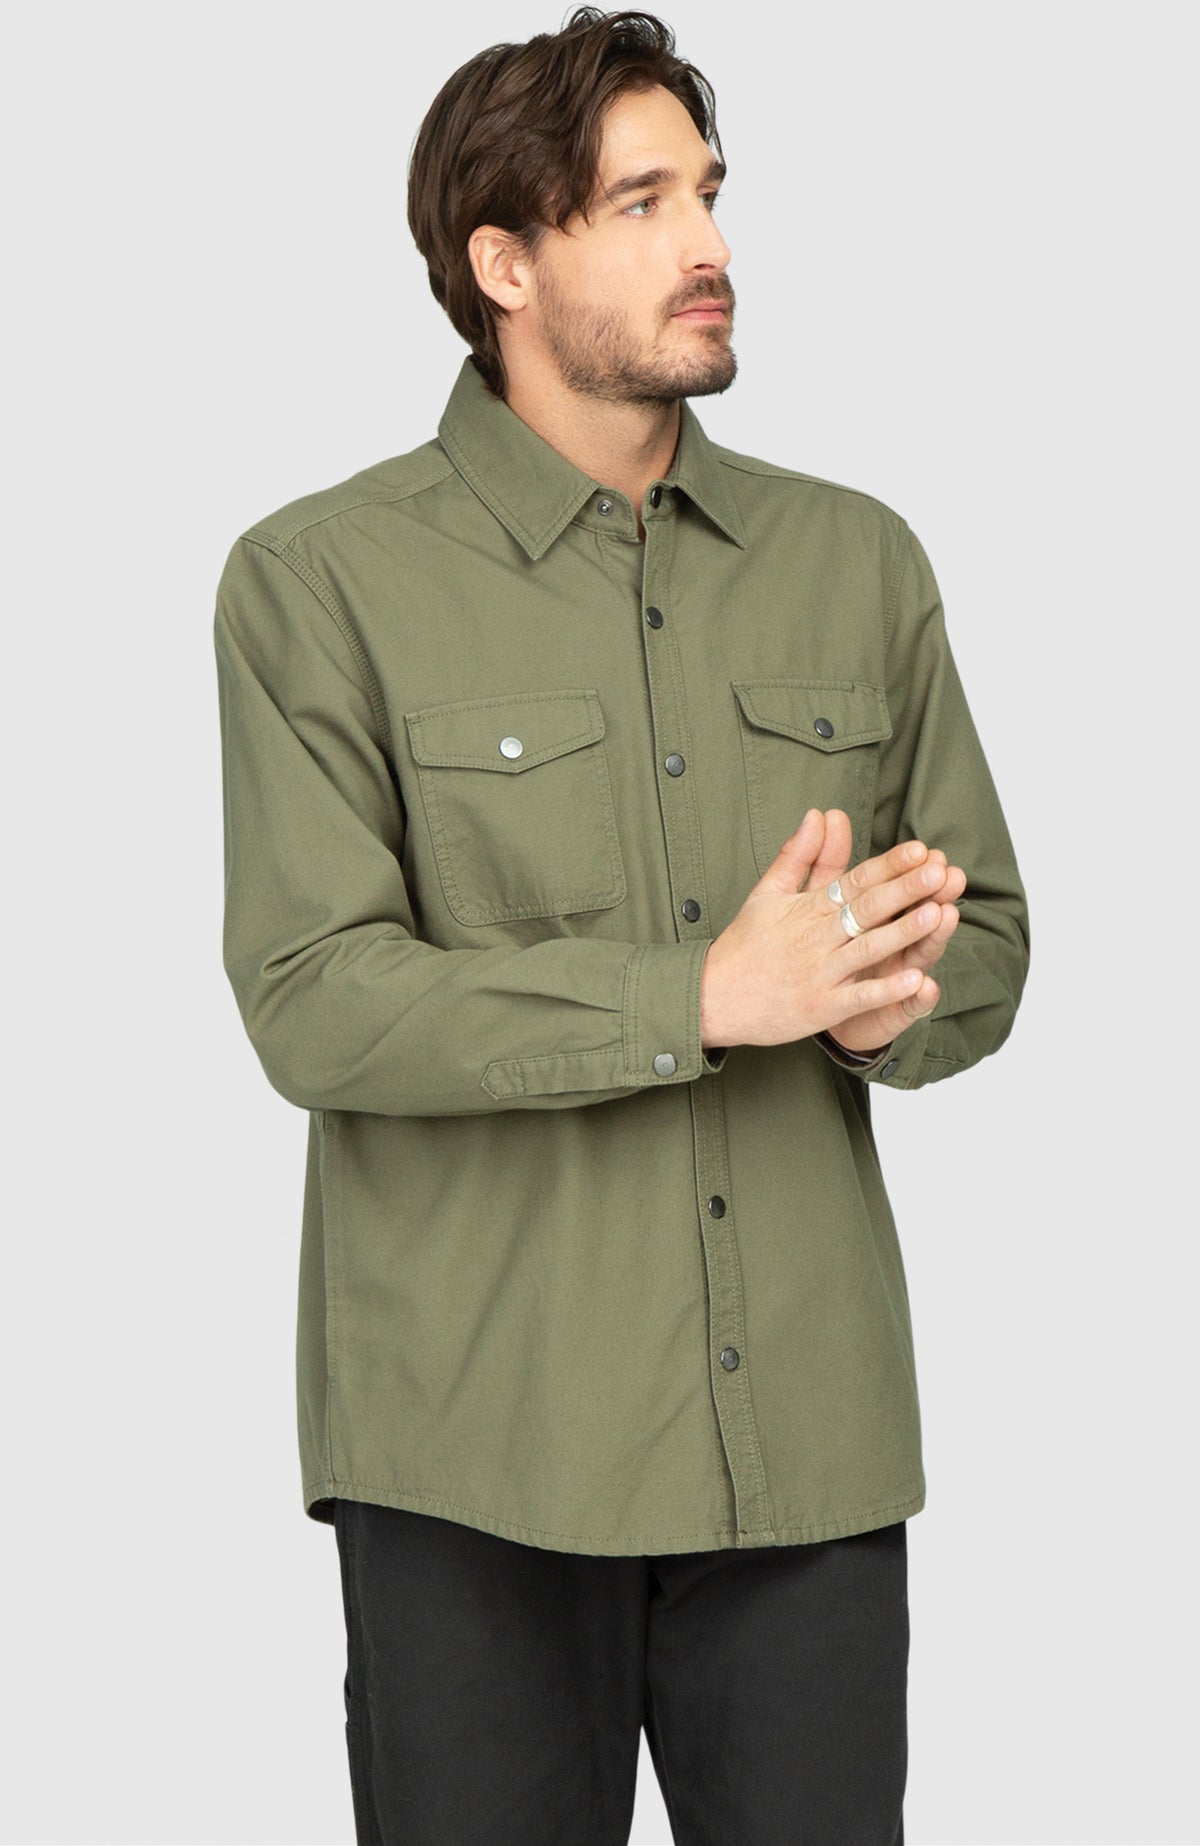 Sage Green Canvas Shirt Jacket - Front Buttoned Up